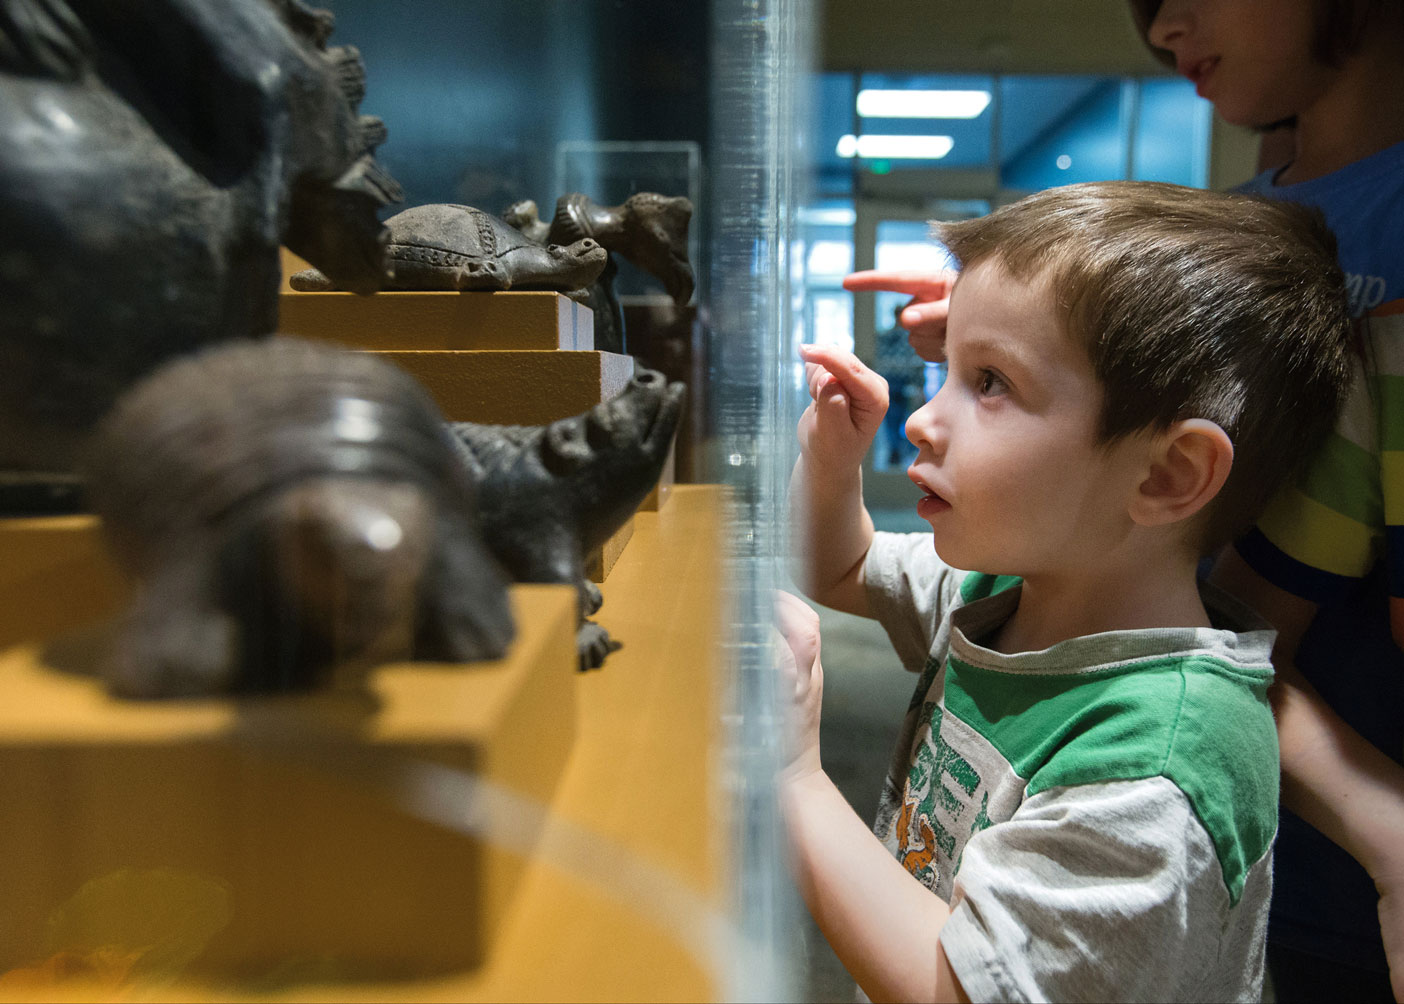 A child looks through the glass of an exhibit at a sculpture of a turtle